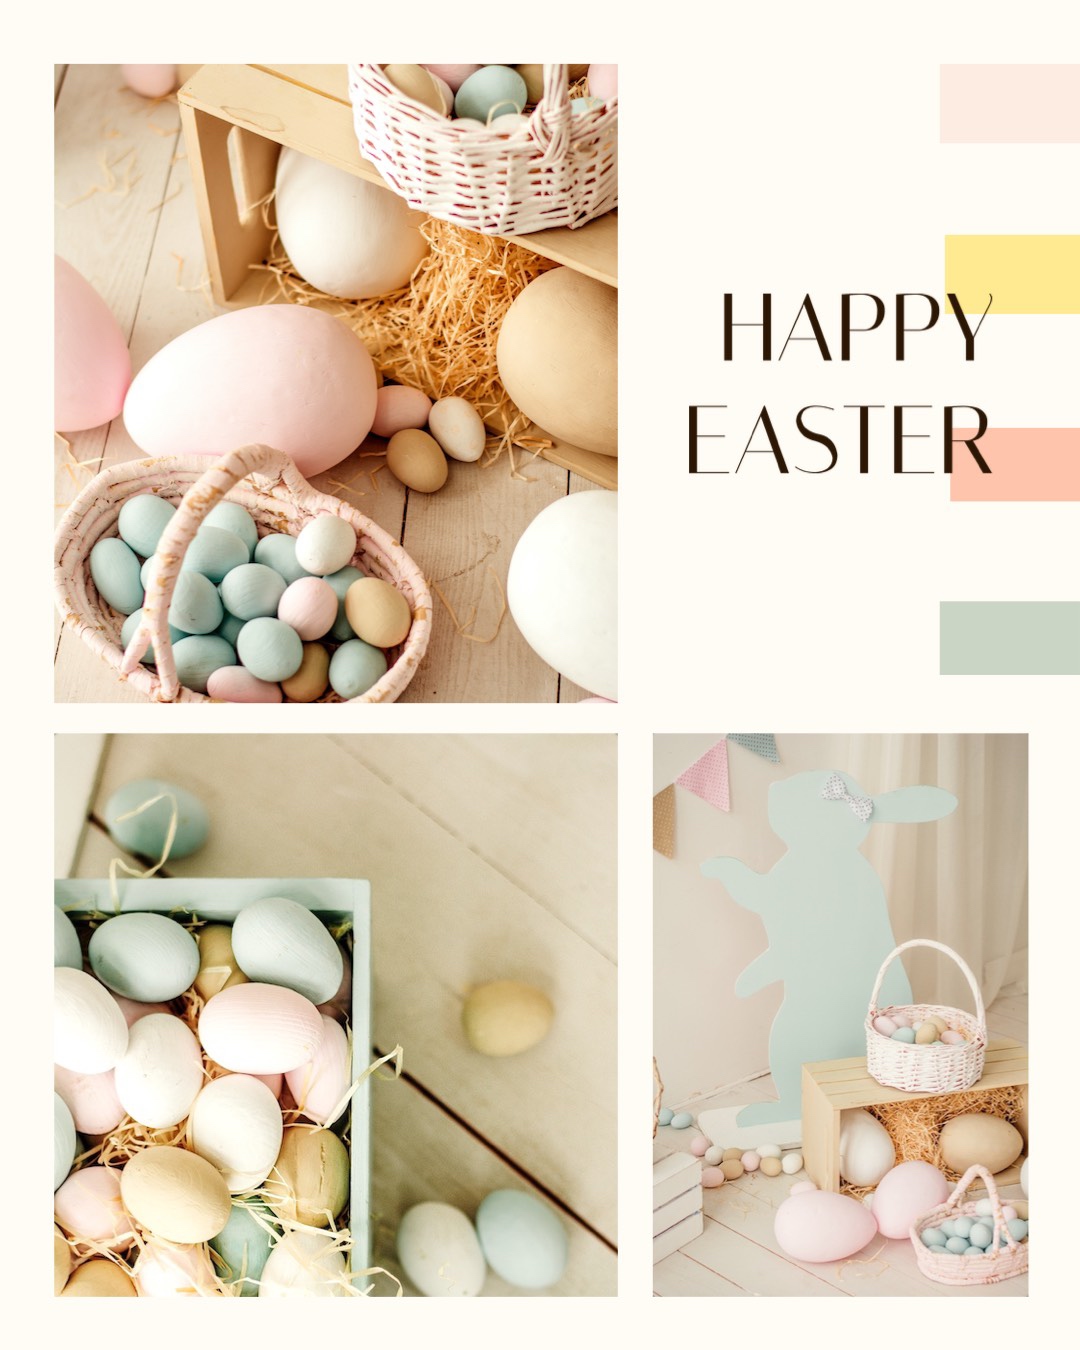 A Collage Of Photos With Pastel Colors And Eggs Happy Easter Template